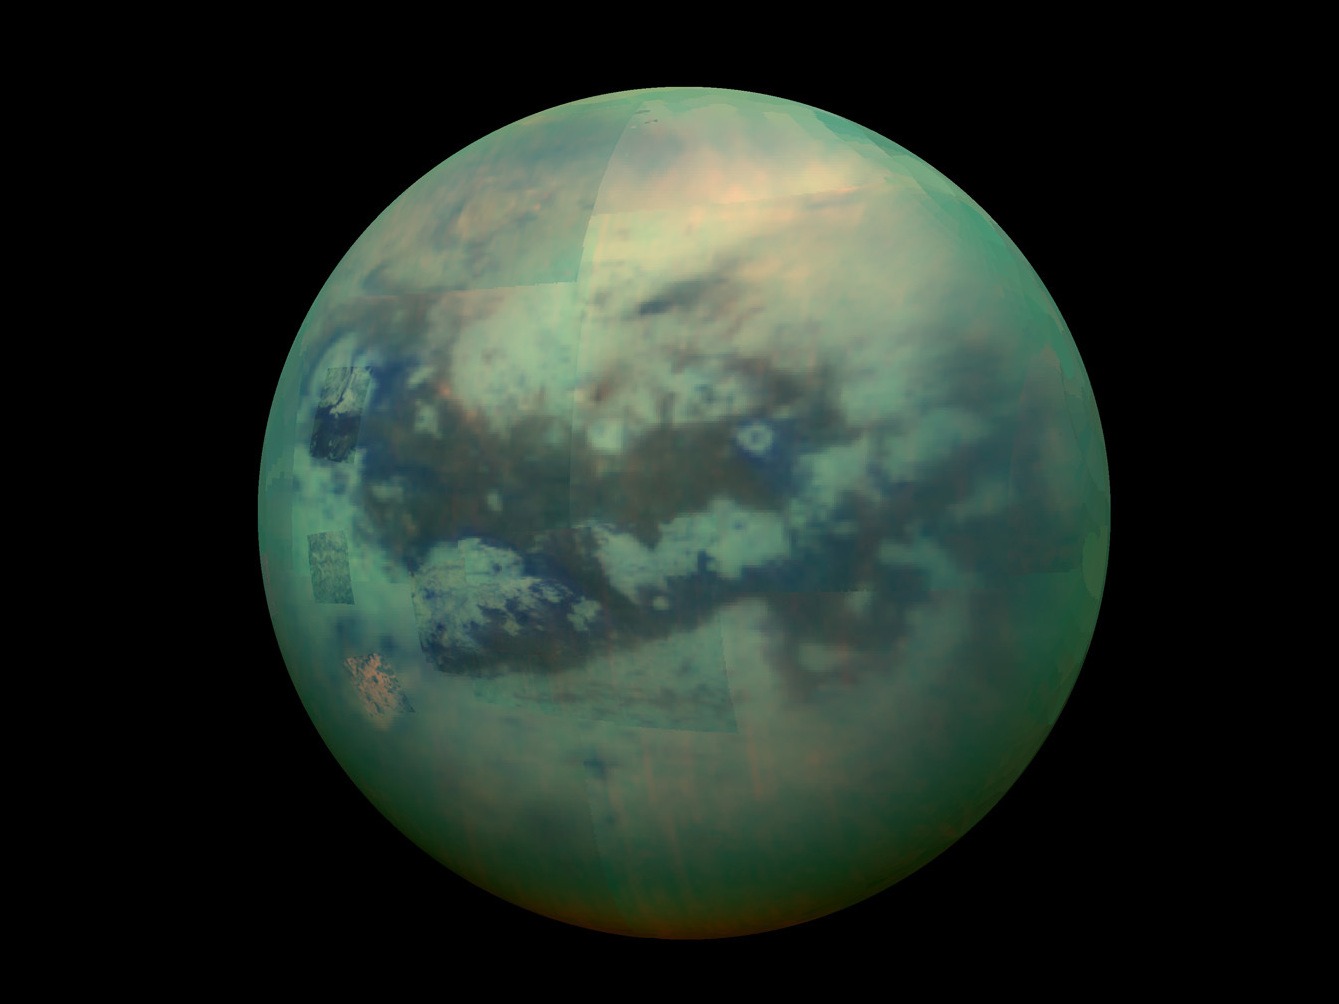 The most amazing fact I heard of this week is that Saturn's moon Titan has riverine valleys like Earth, except they are formed by flowing liquid methane. Of course, it also rains methane, but the drops are twice as large as rain on earth and fall at a fifth of the speed.

It also has volcanoes that spew a "magma" that is water and ammonia, and at -100C has the same viscosity as molten rock.